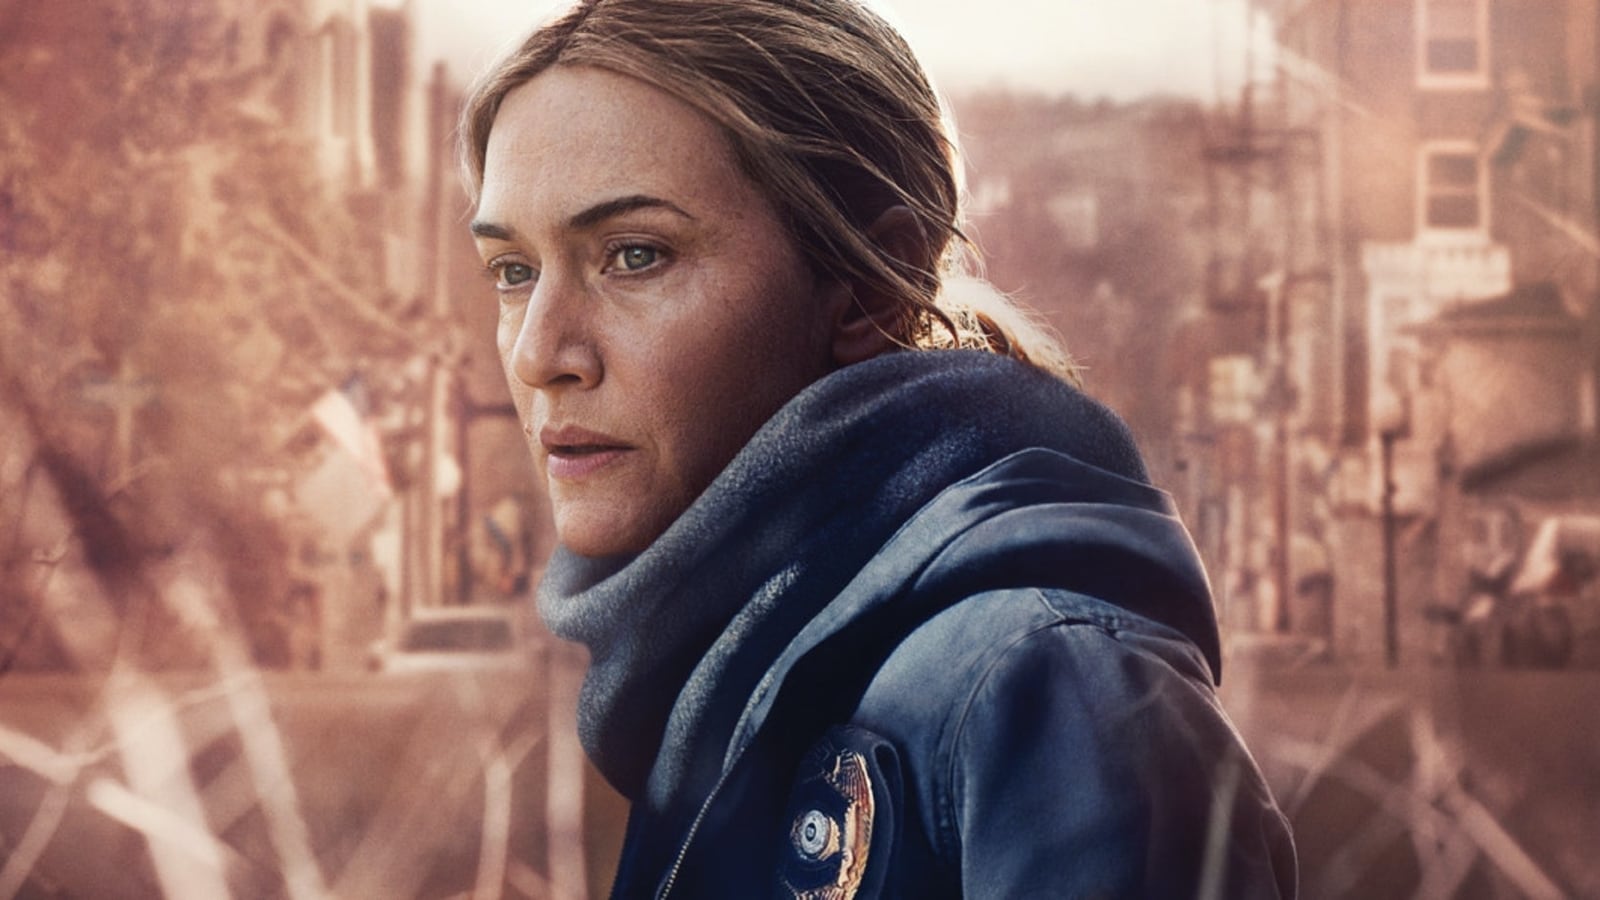 Mare of Easttown review: Weary Kate Winslet stars in HBO’s mediocre murder mystery that pales in comparison to Broadchurch